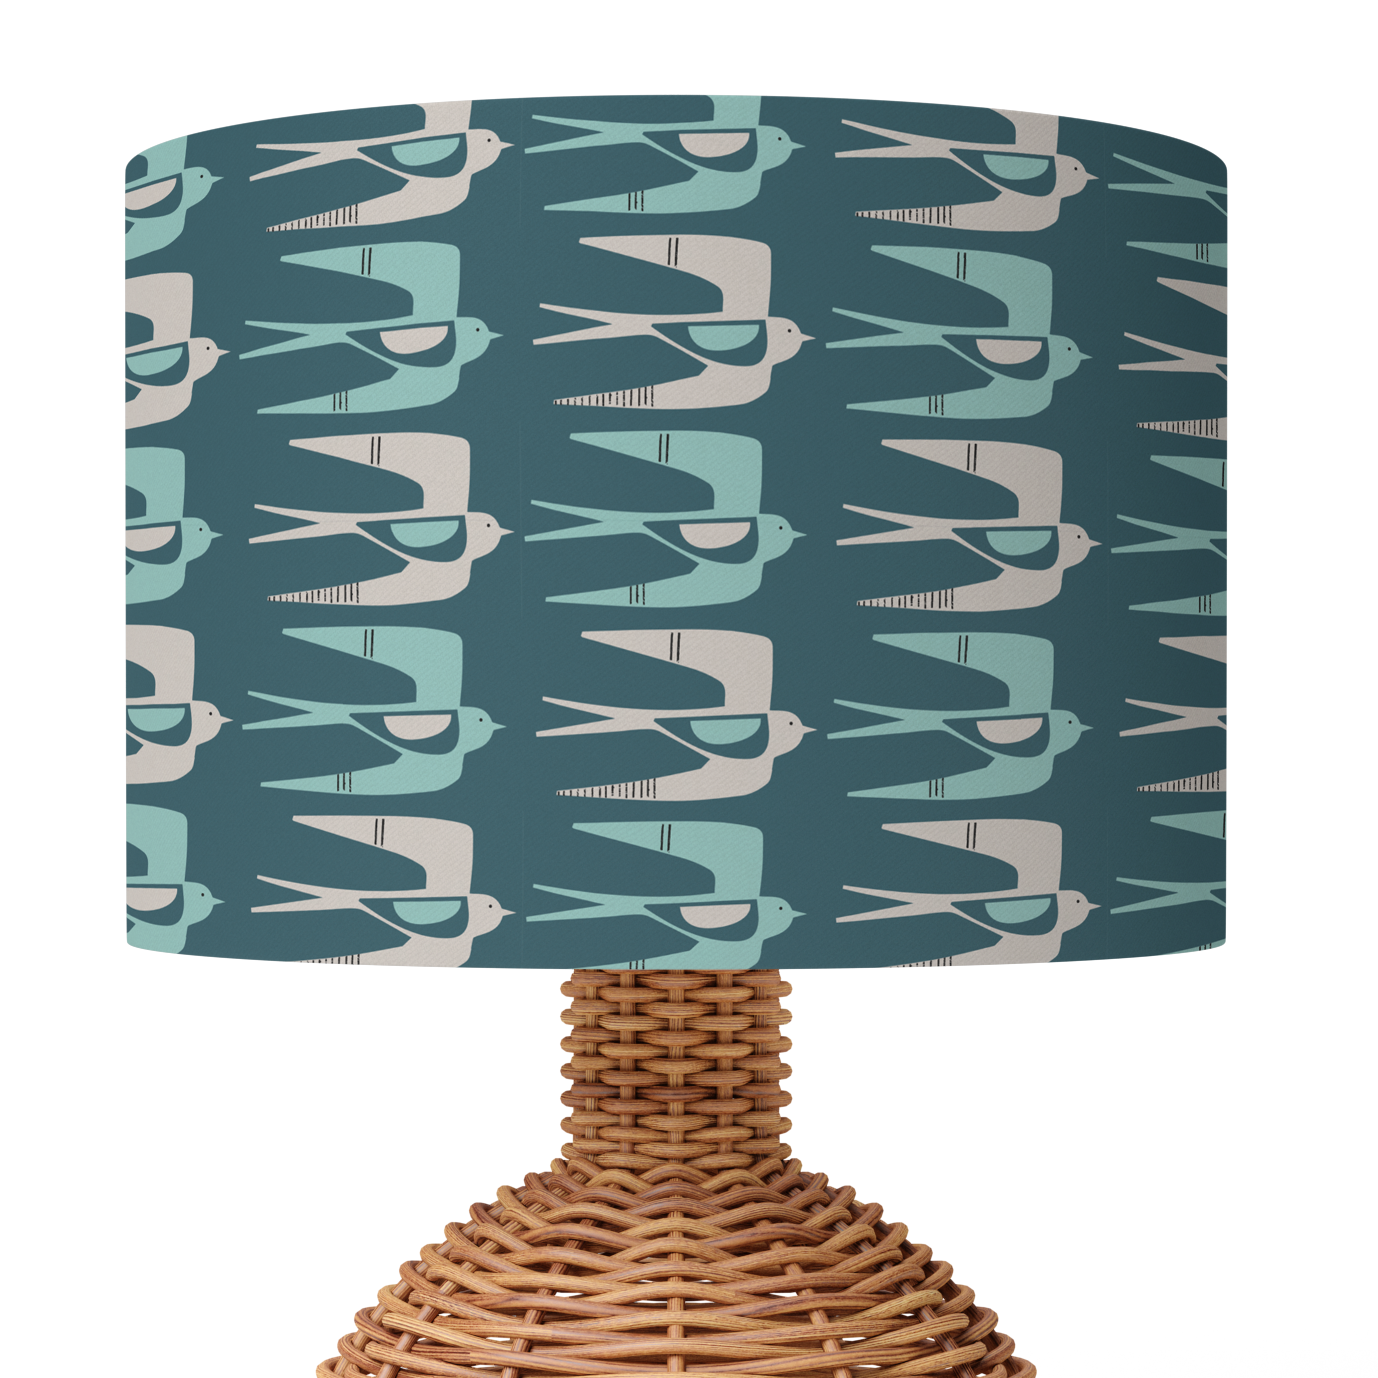 Swallows Lampshade - Dark Teal (Ceiling/Pendant or Table)